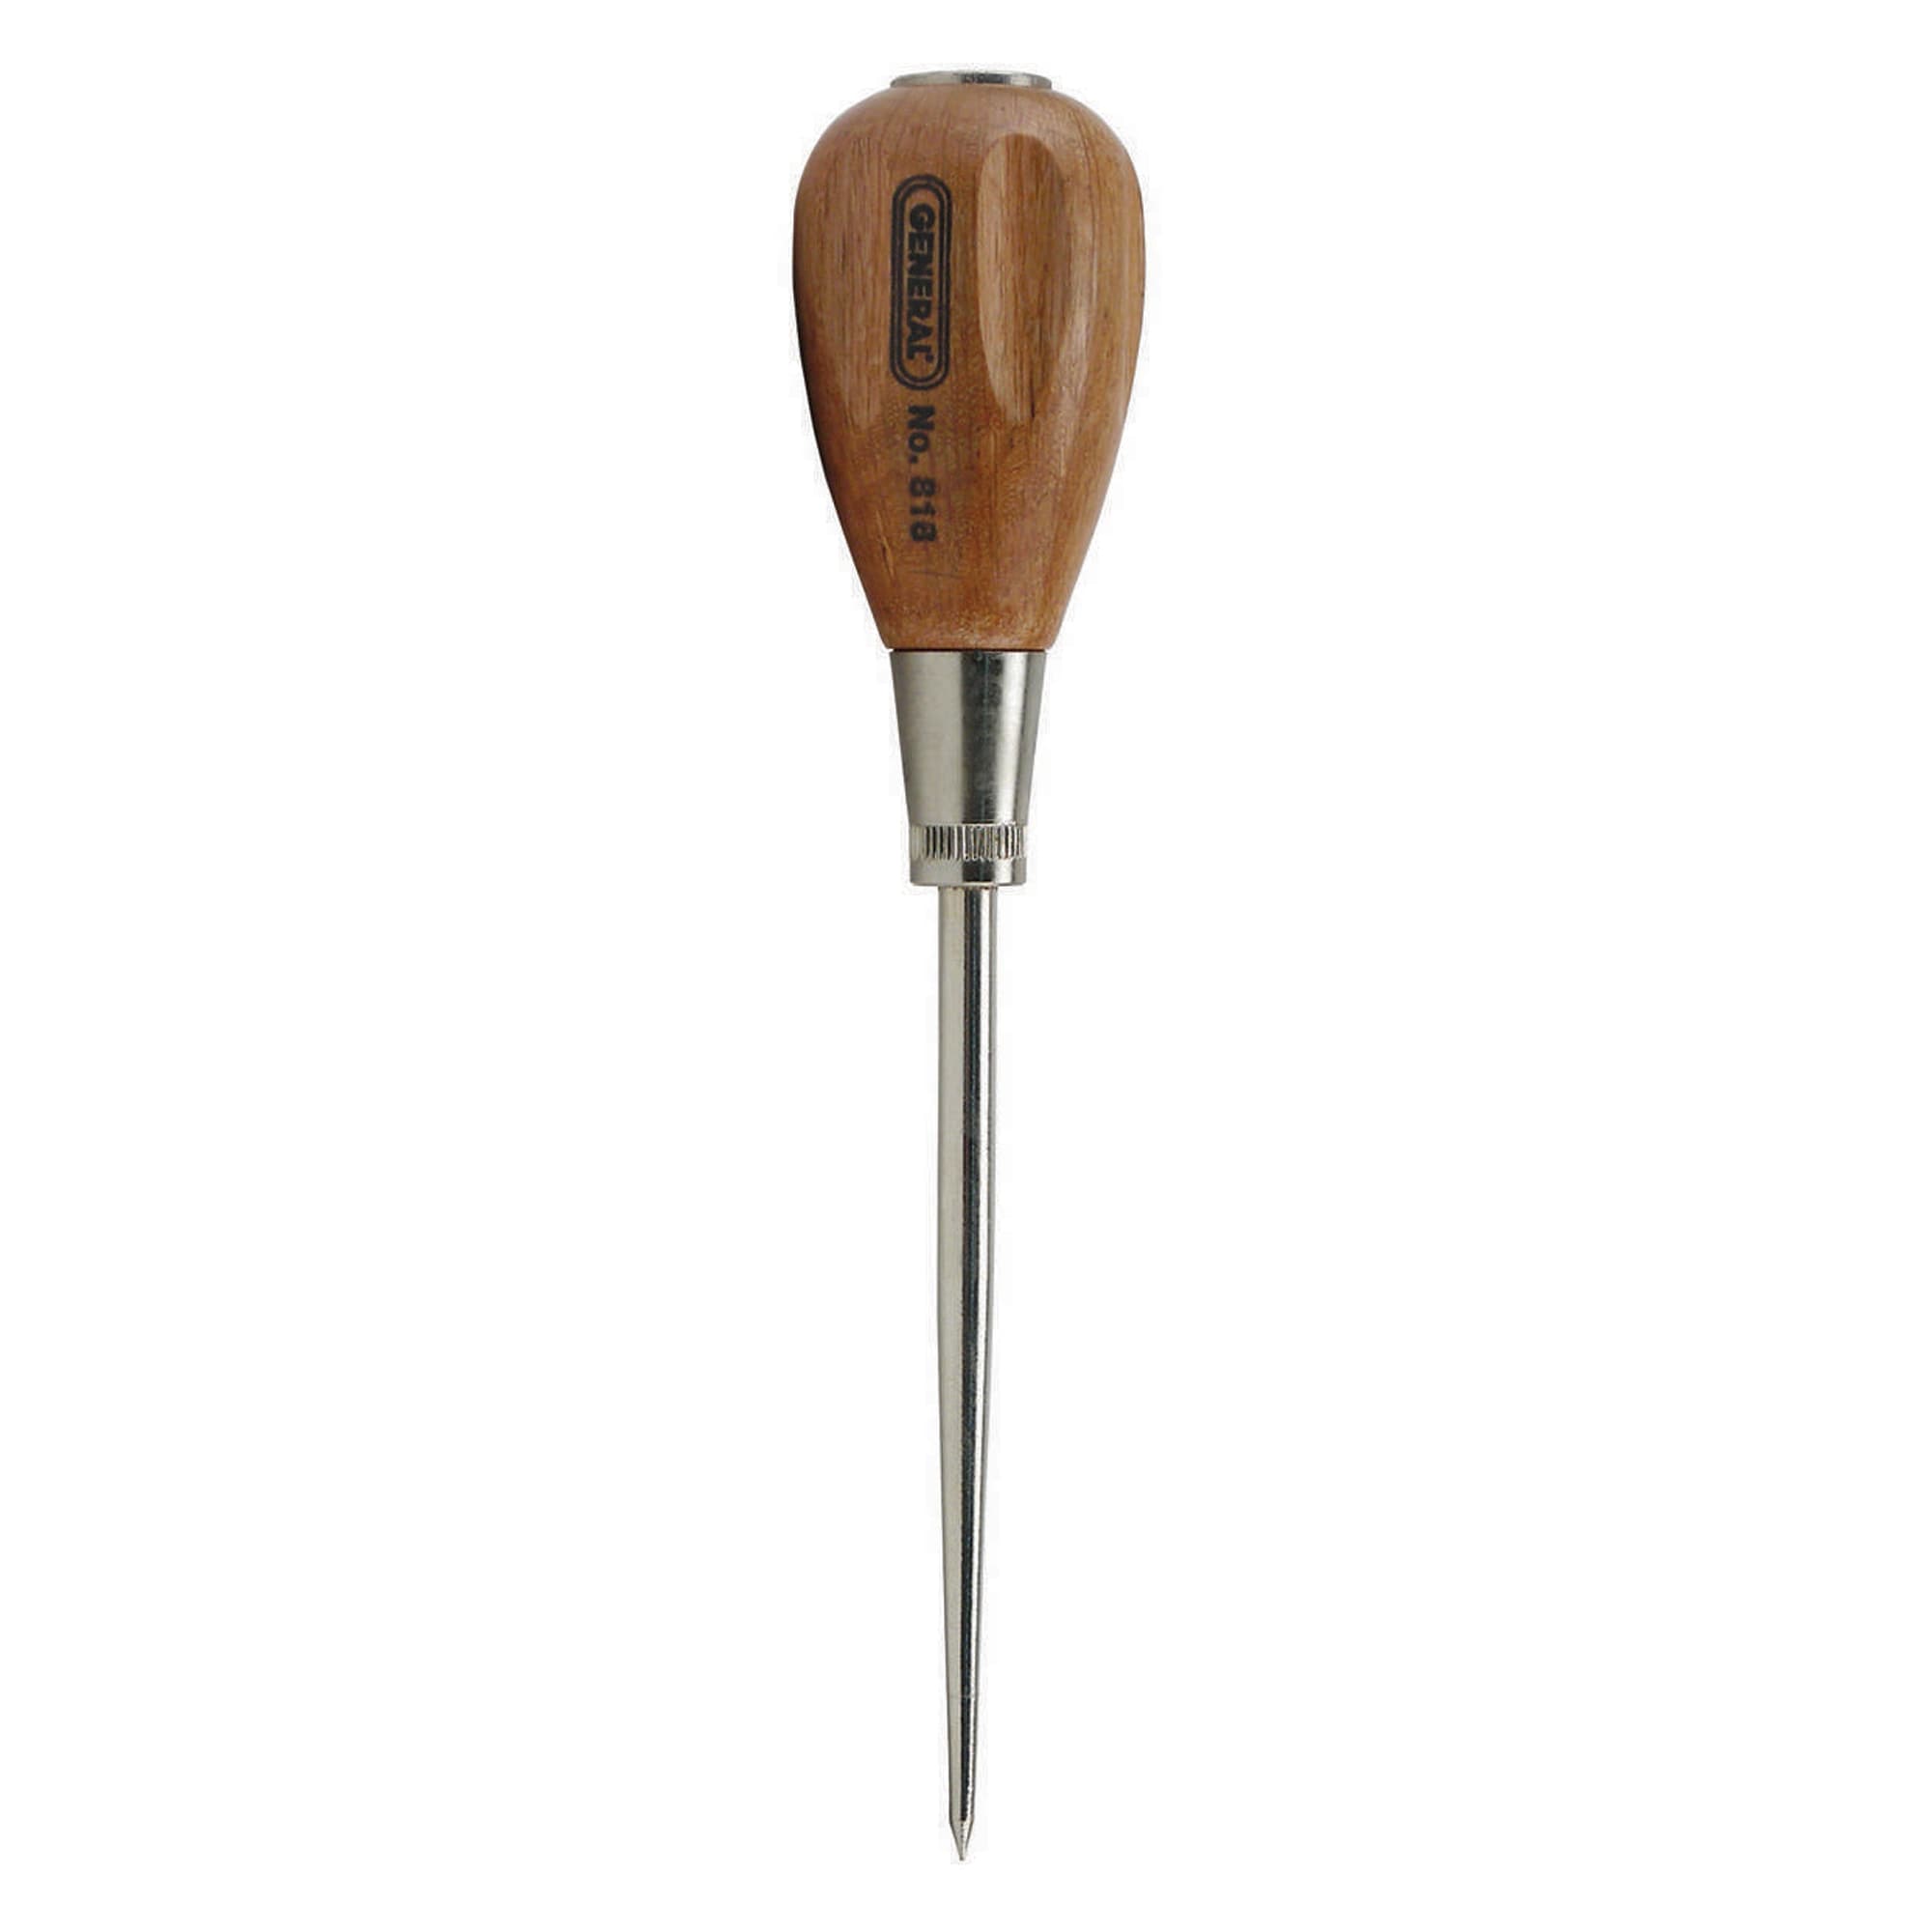 General Tools & Instruments General Tools Awl Punch - Round Steel